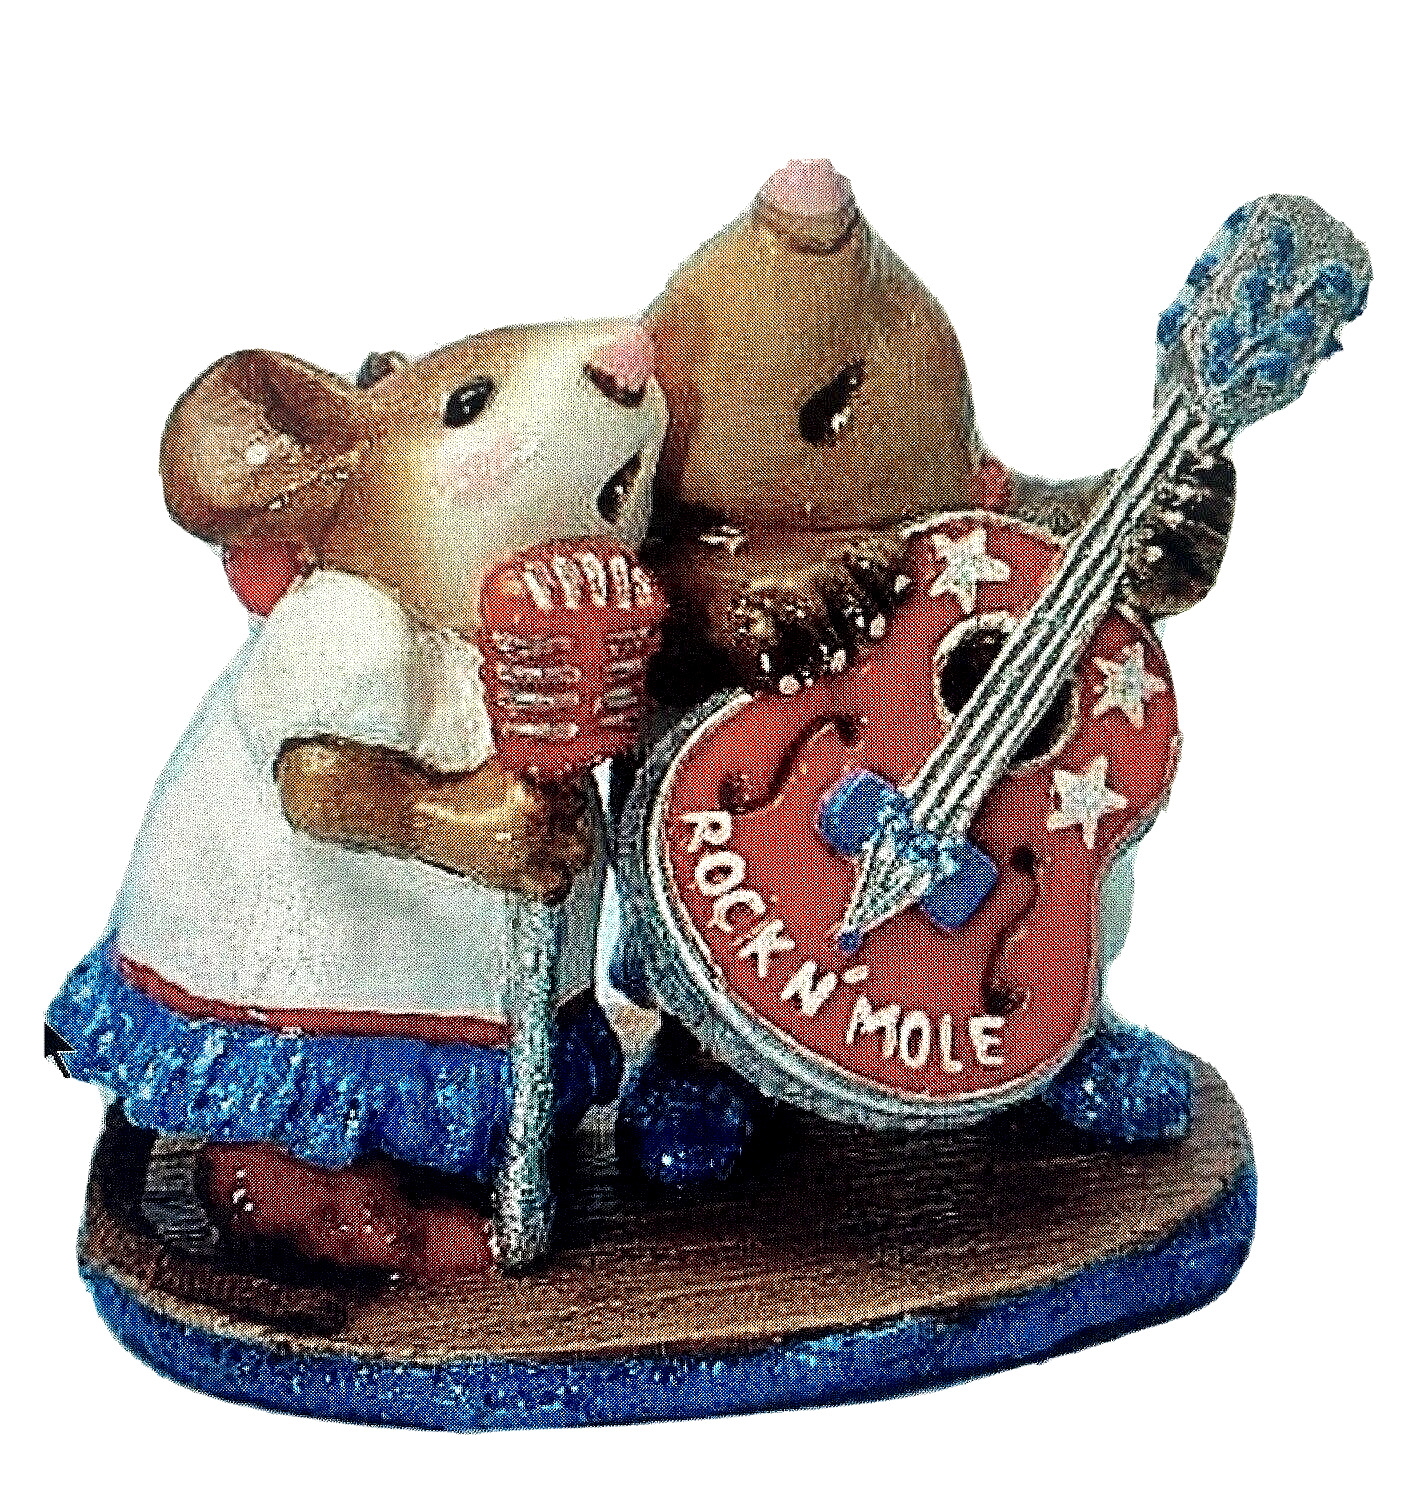 New Wee Forest Folk STAND BY YOUR MOLE Limited Edition GIRL MOUSE SINGING MMO-1